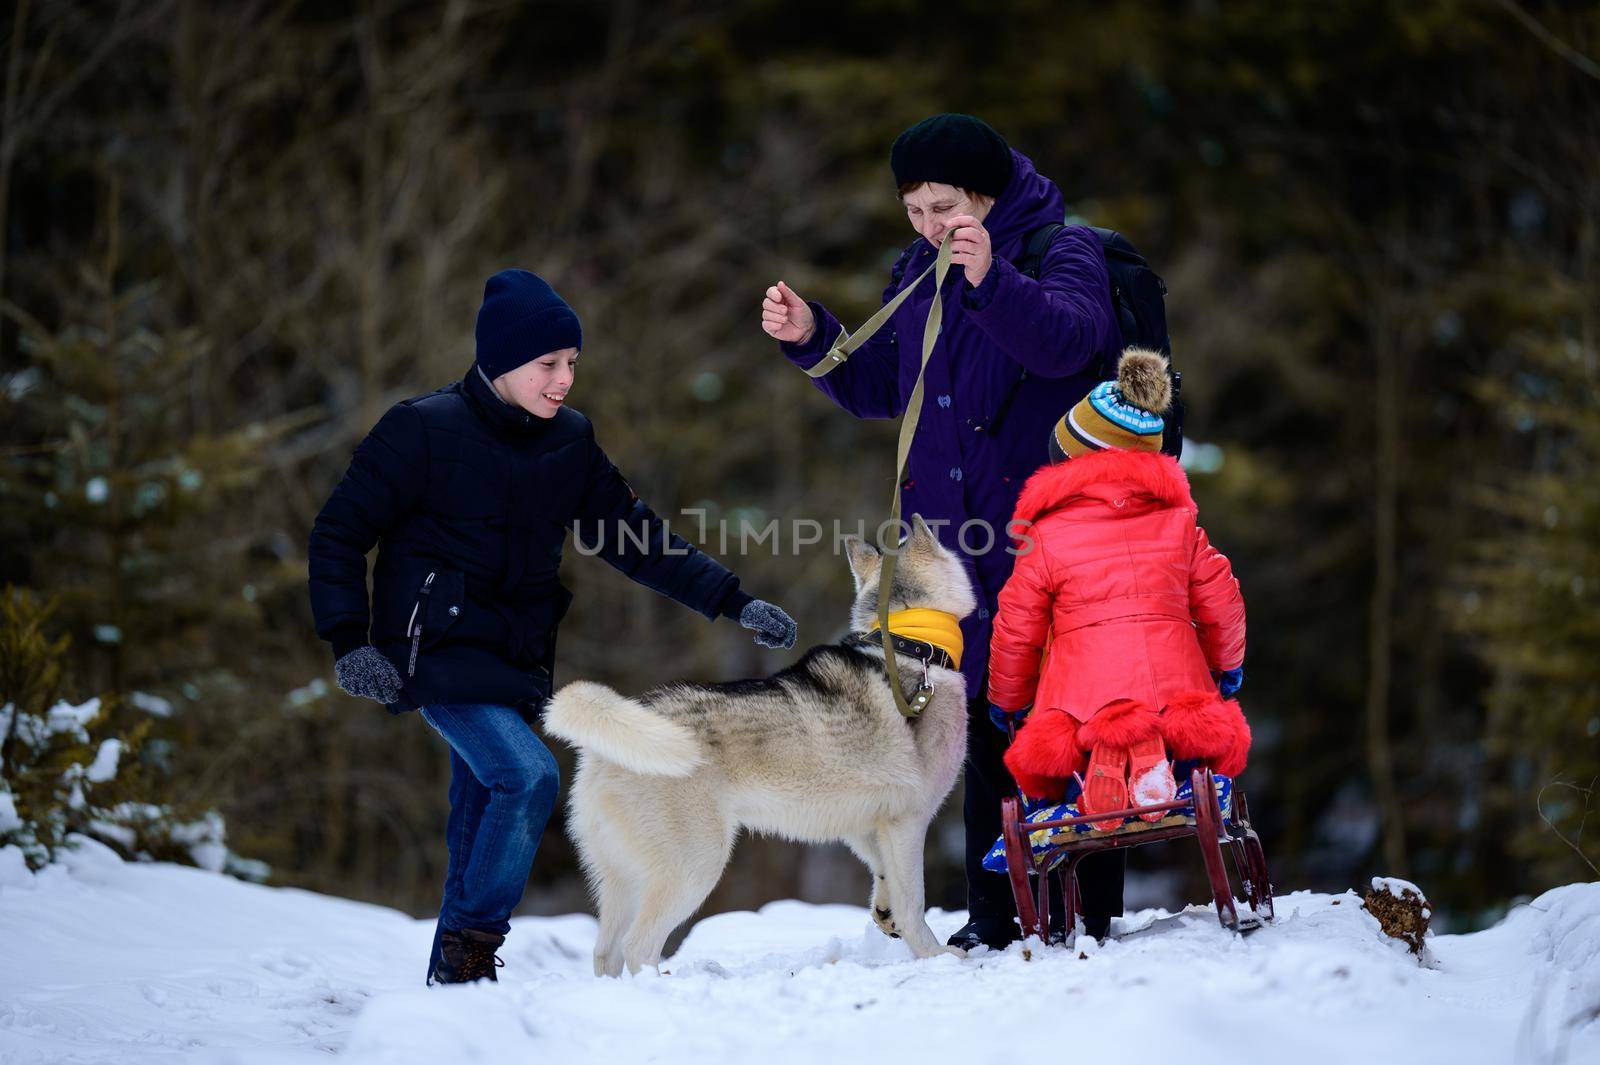 Grandmother with grandchildren and dog walking in the winter forest, winter fun. by Niko_Cingaryuk